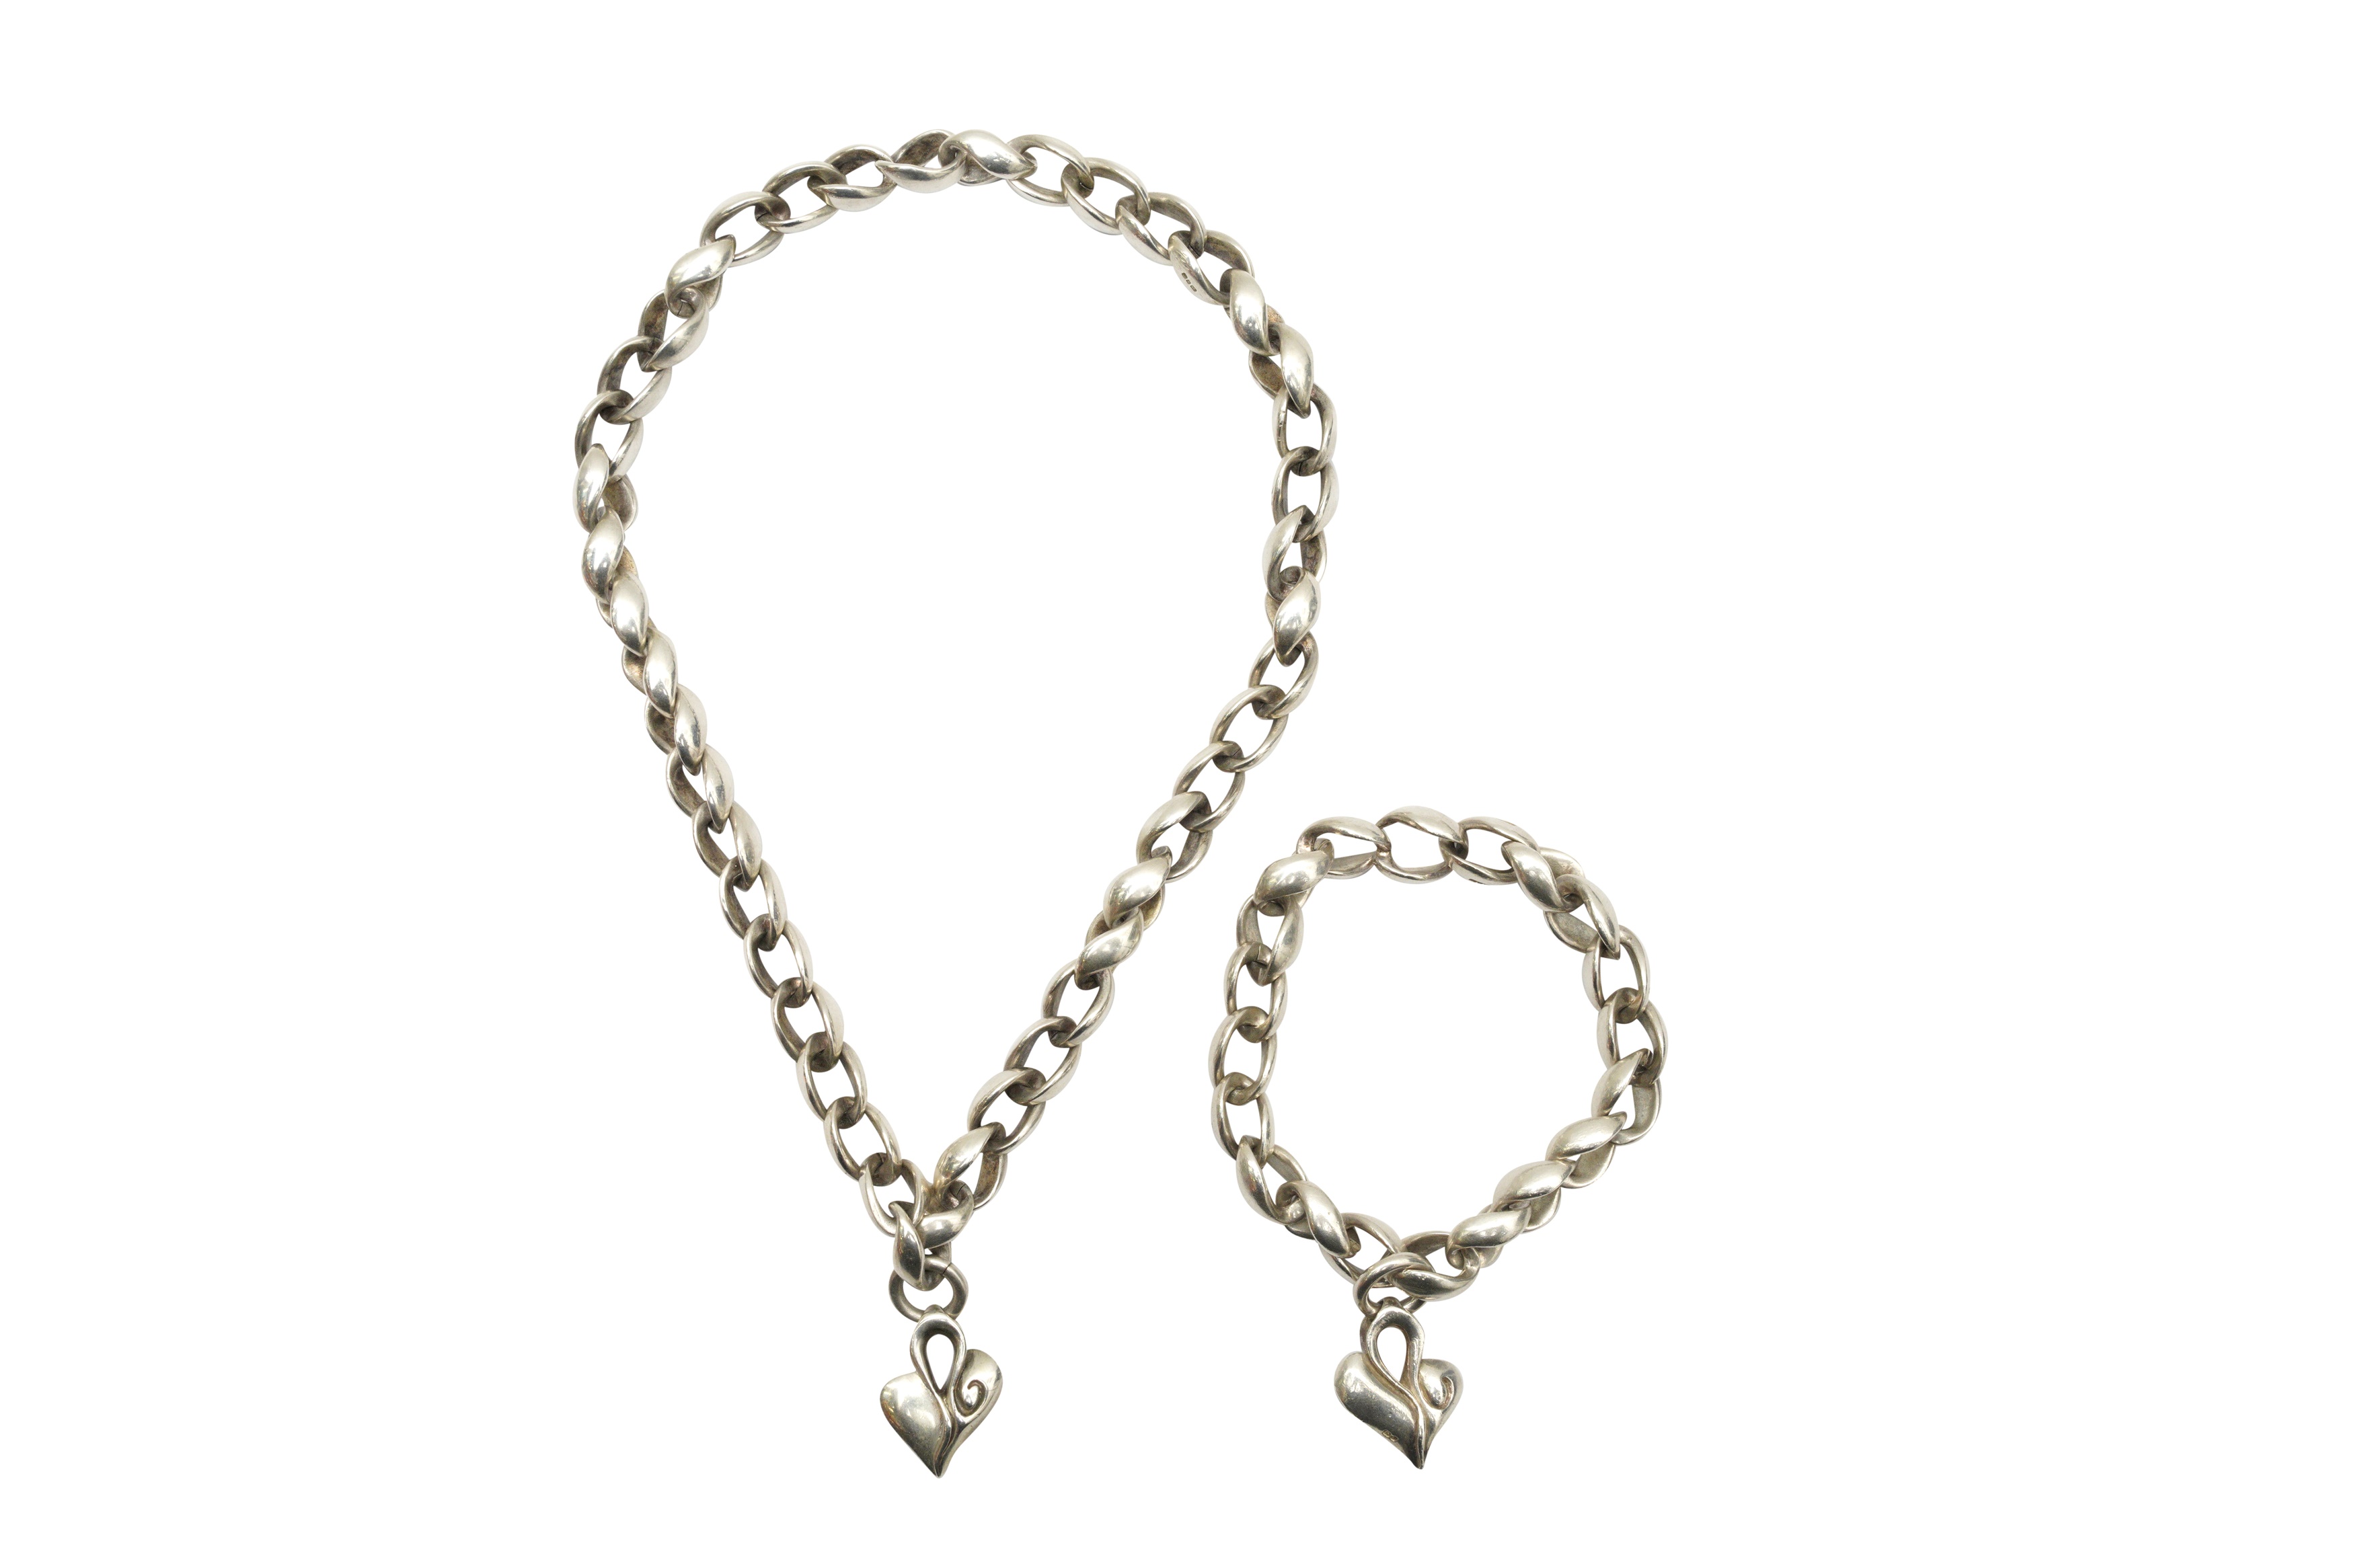 A SILVER CURB-LINK NECKLACE AND BRACELET SUITE, CIRCA 1994